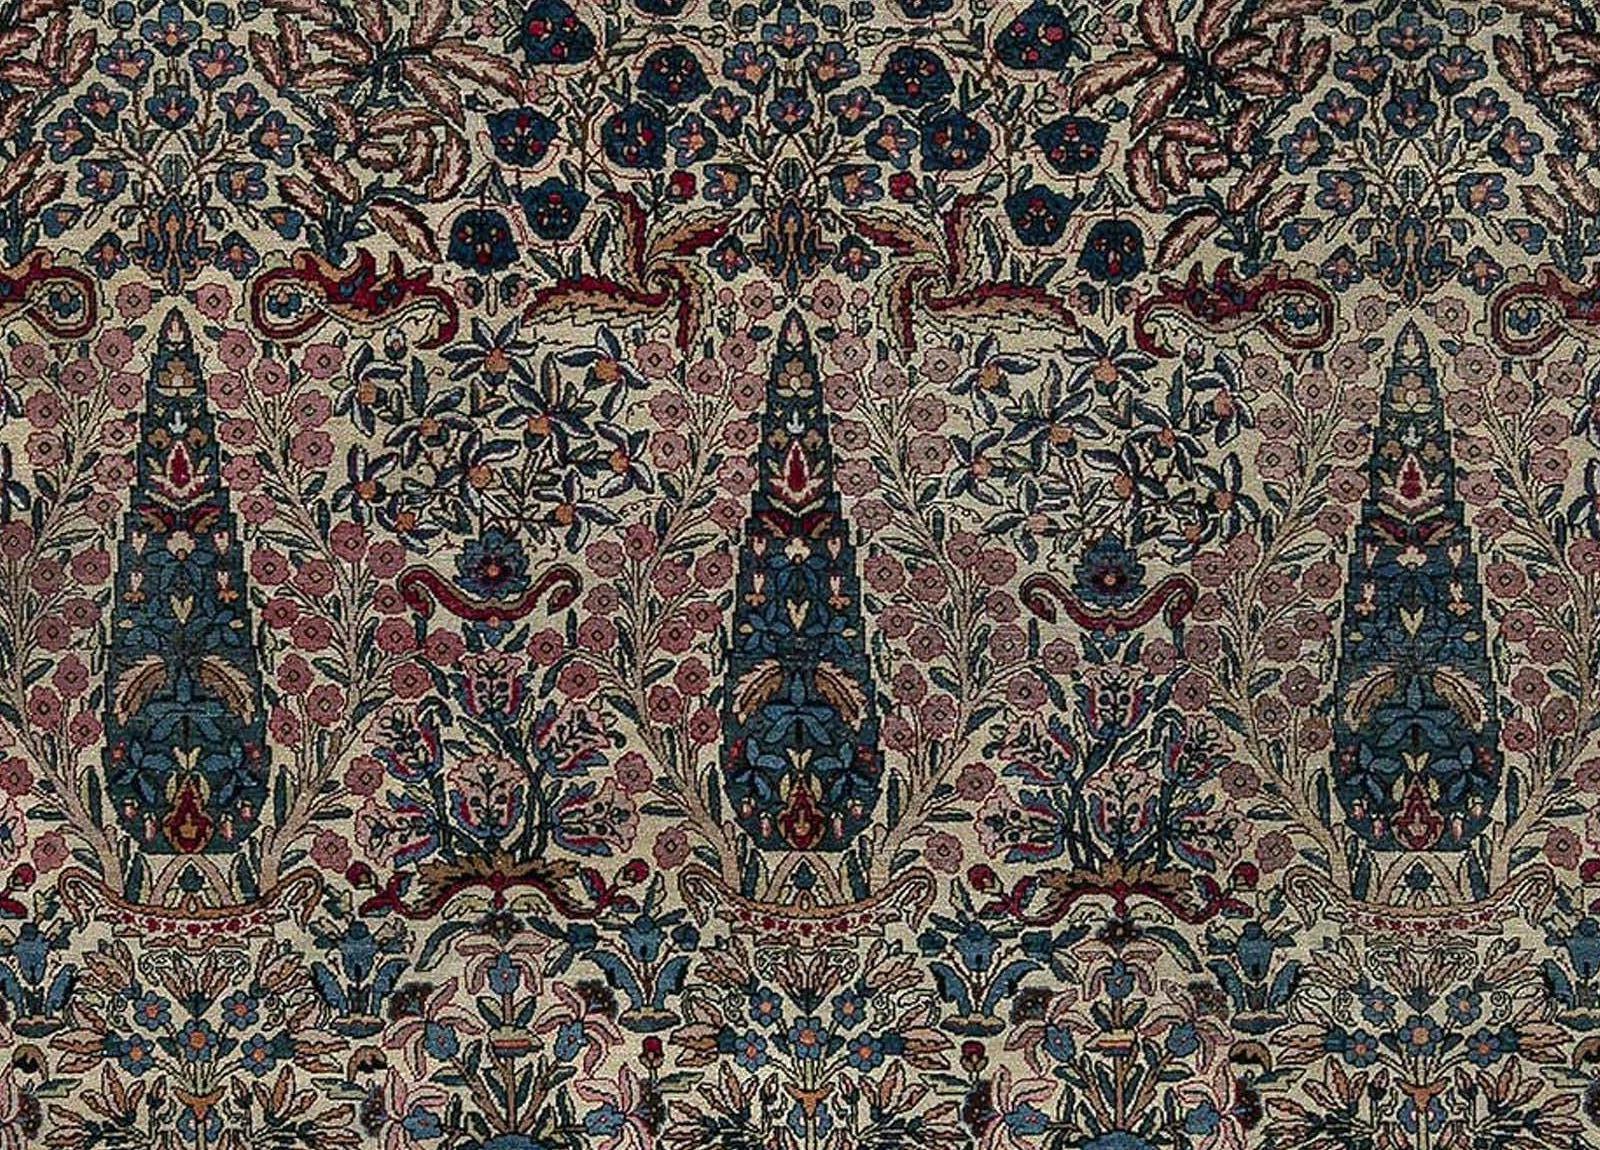 Early 20th century Persian Kirman wool rug in blue, brown, green, pink and red
Size: 10'2